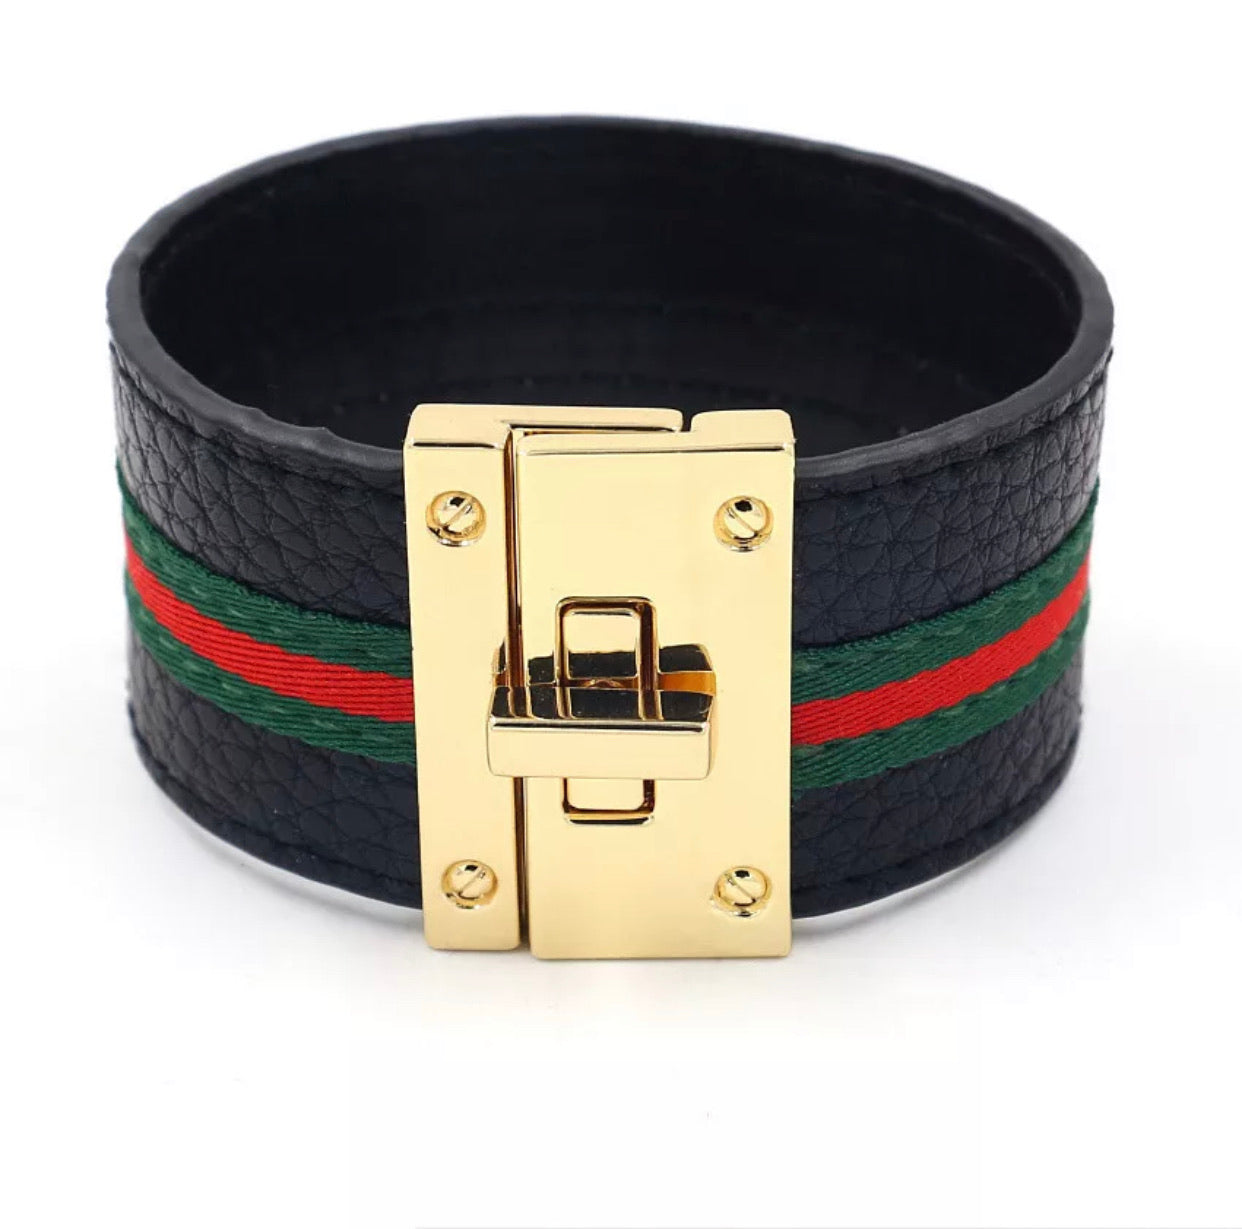 Black Leather Cuff Bracelet with a Golden Buckle